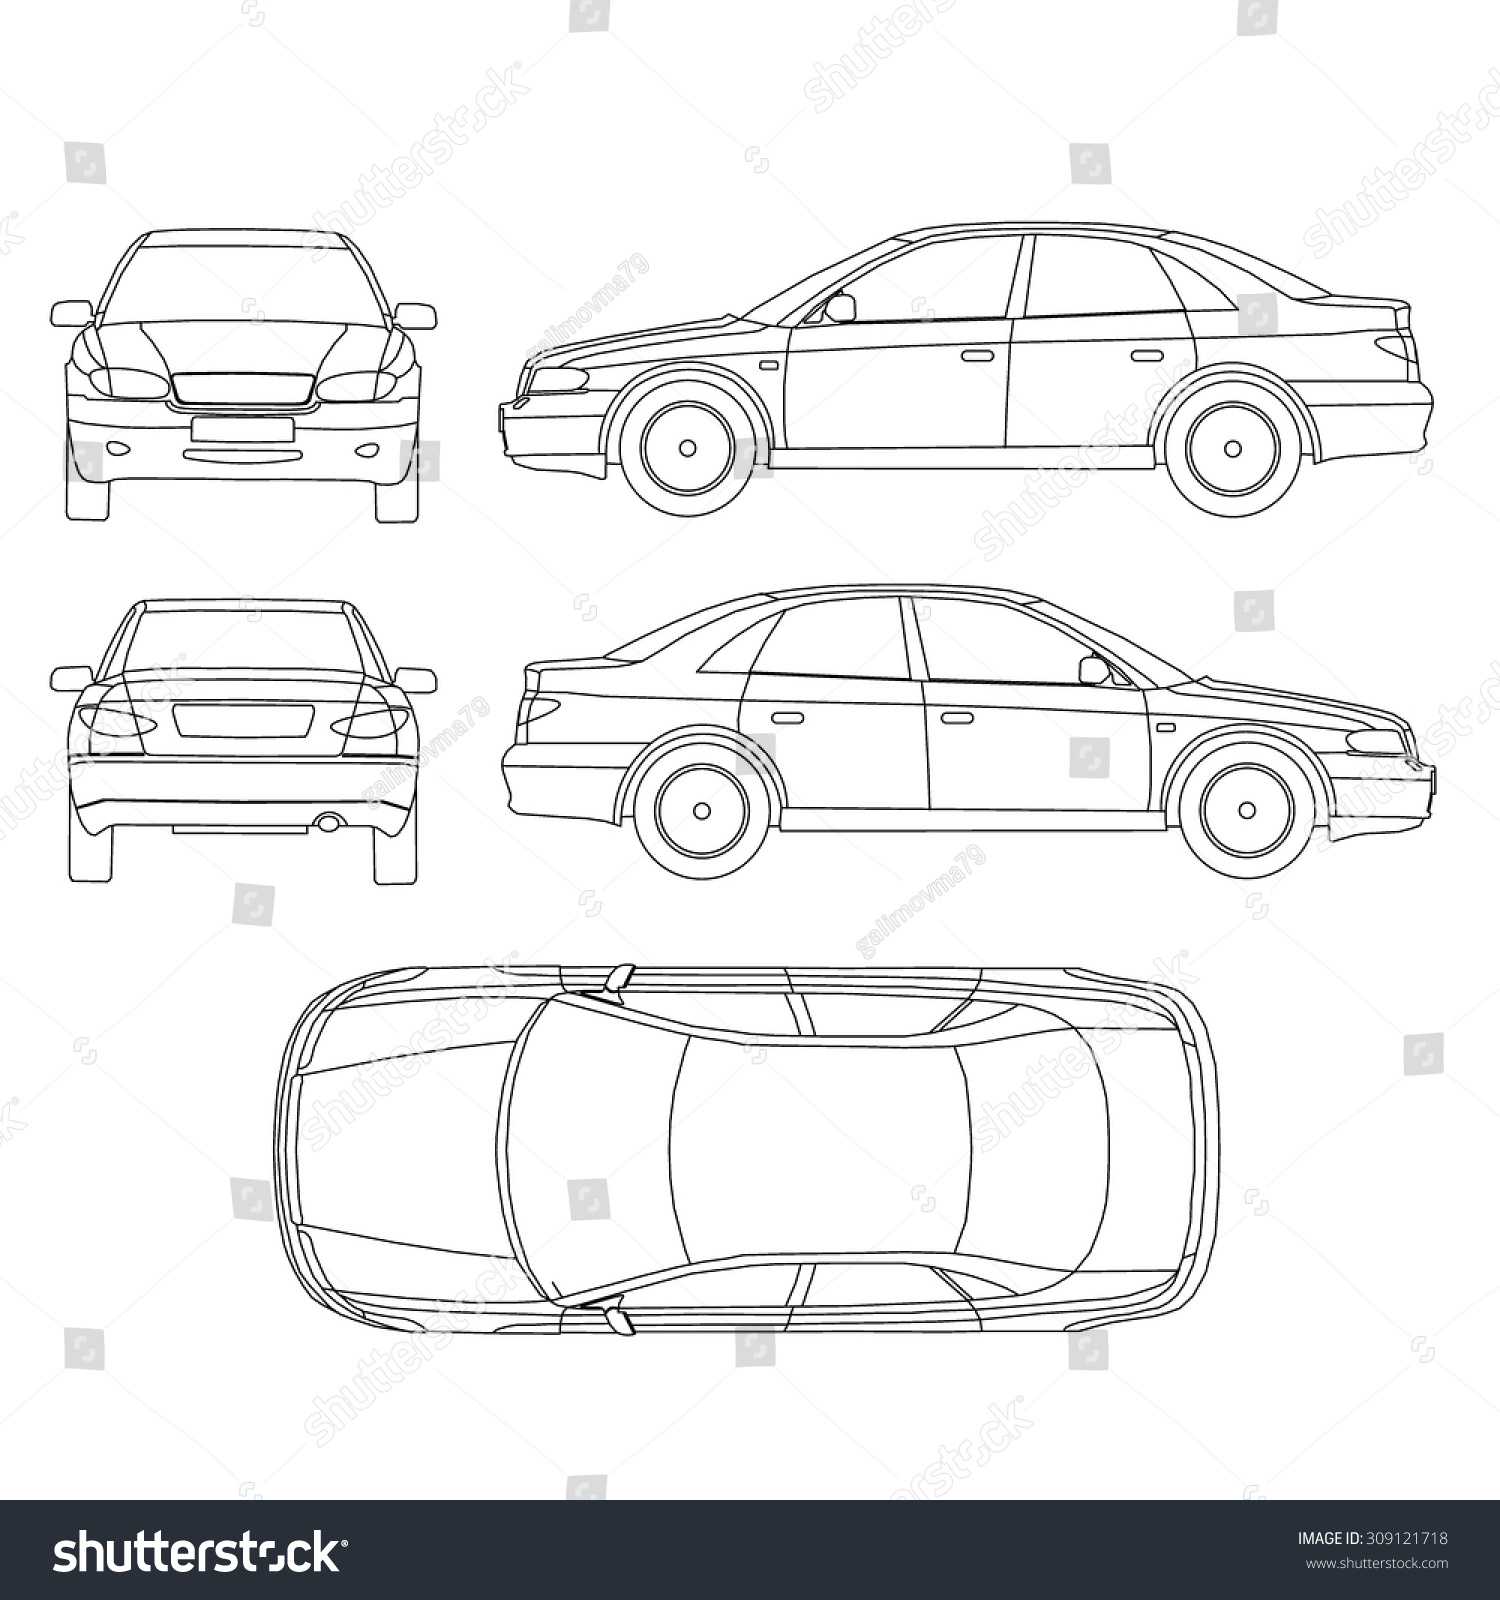 Car Line Draw Insurance, Rent Damage,… Stock Photo 309121718 Pertaining To Car Damage Report Template